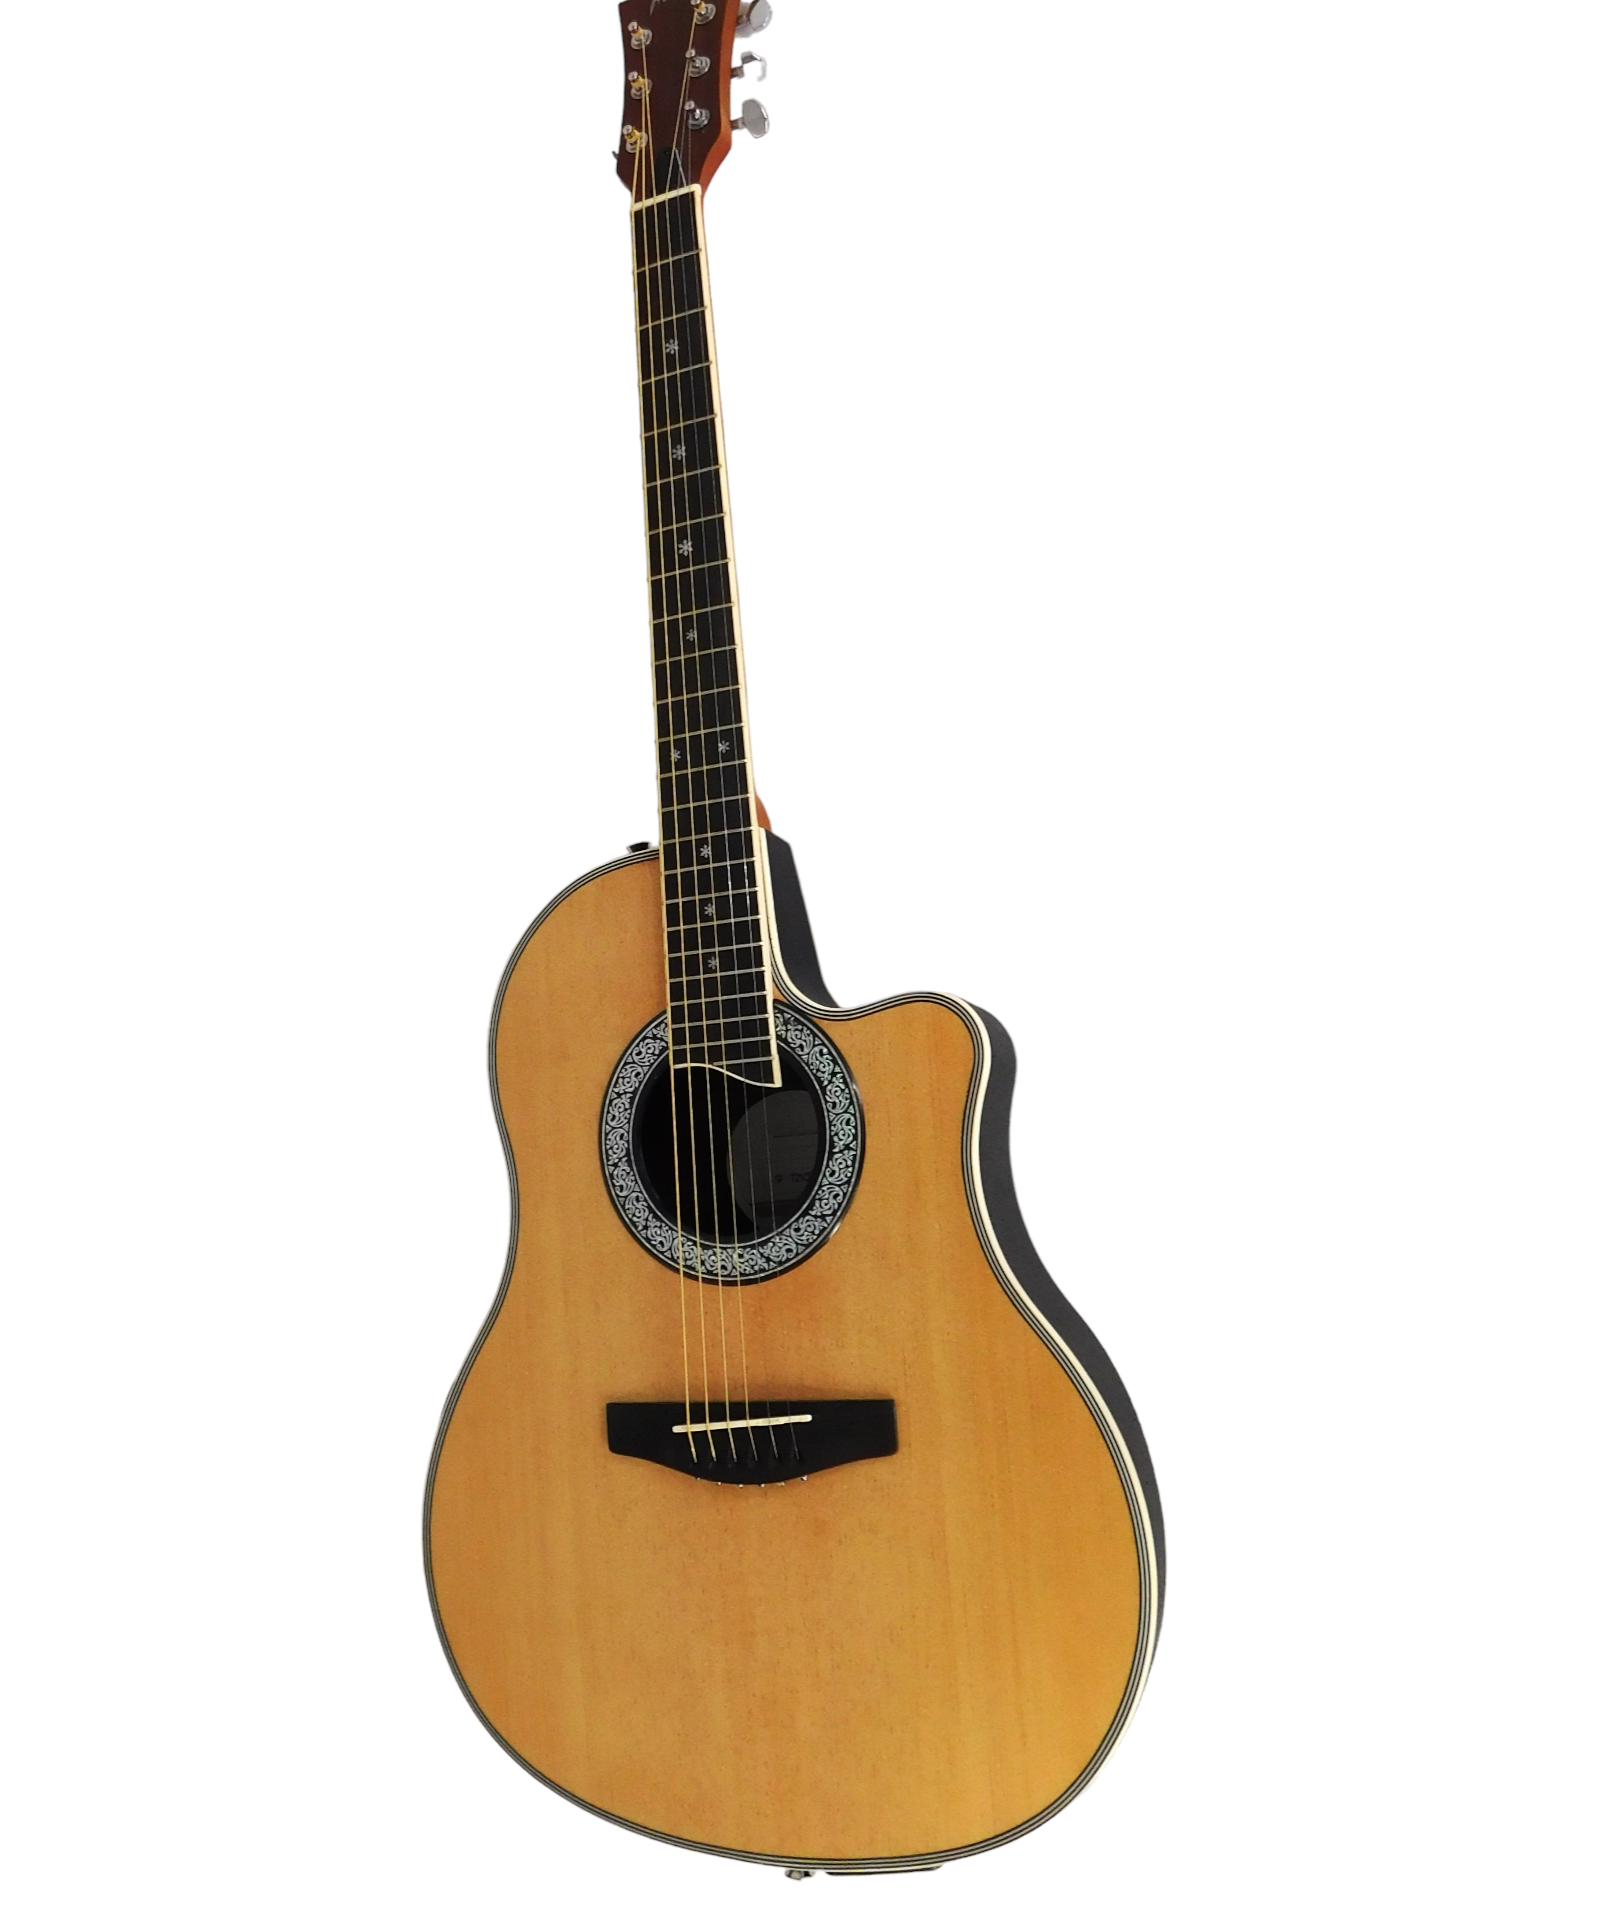 Caraya SP-721CEQ Natural Spruce Top Round-Back Guitar with EQ +